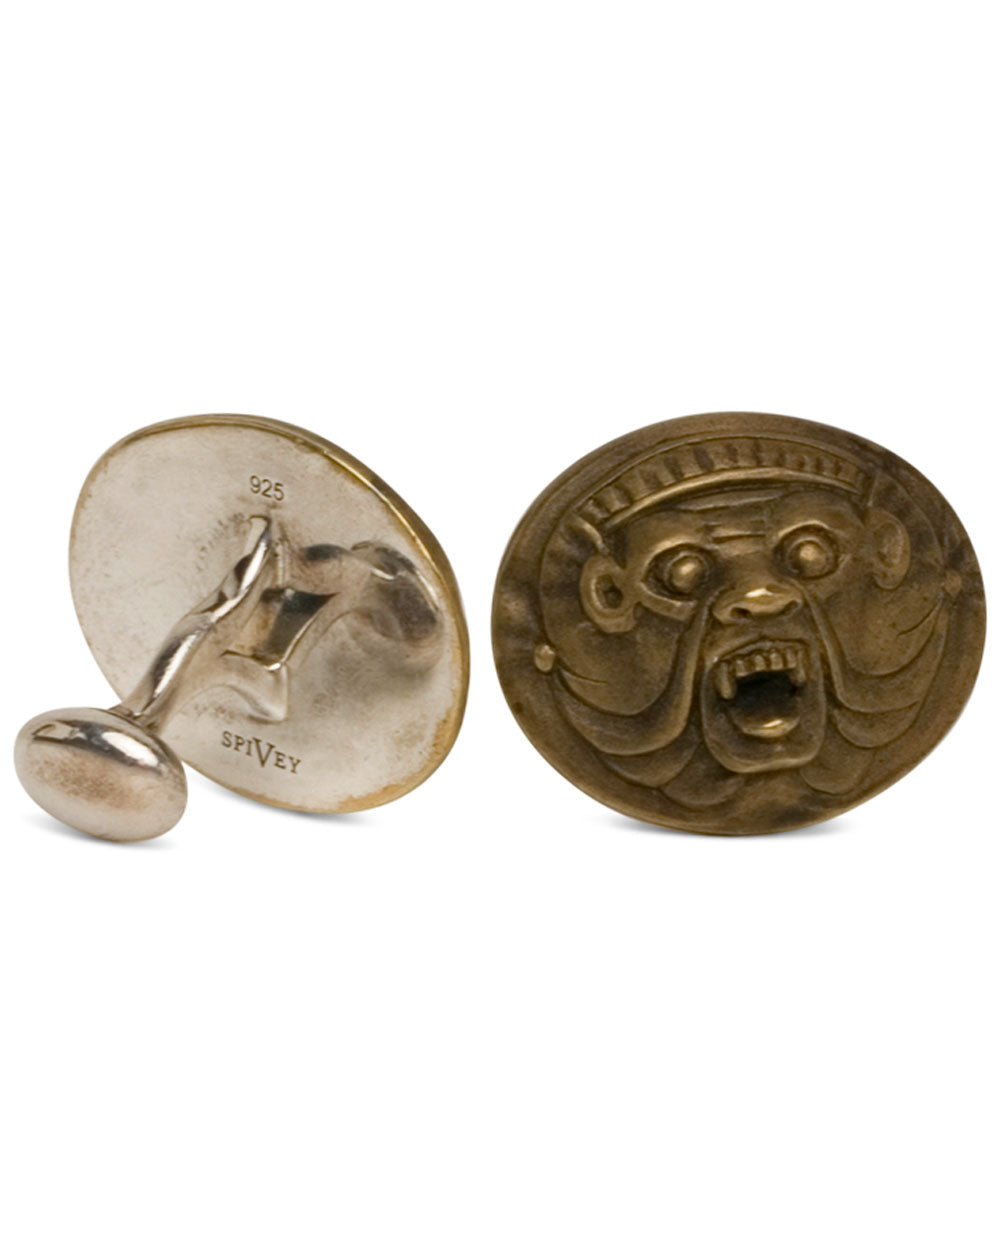 Yellow Bronze and Sterling Silver Bruxellois Demon Cufflinks